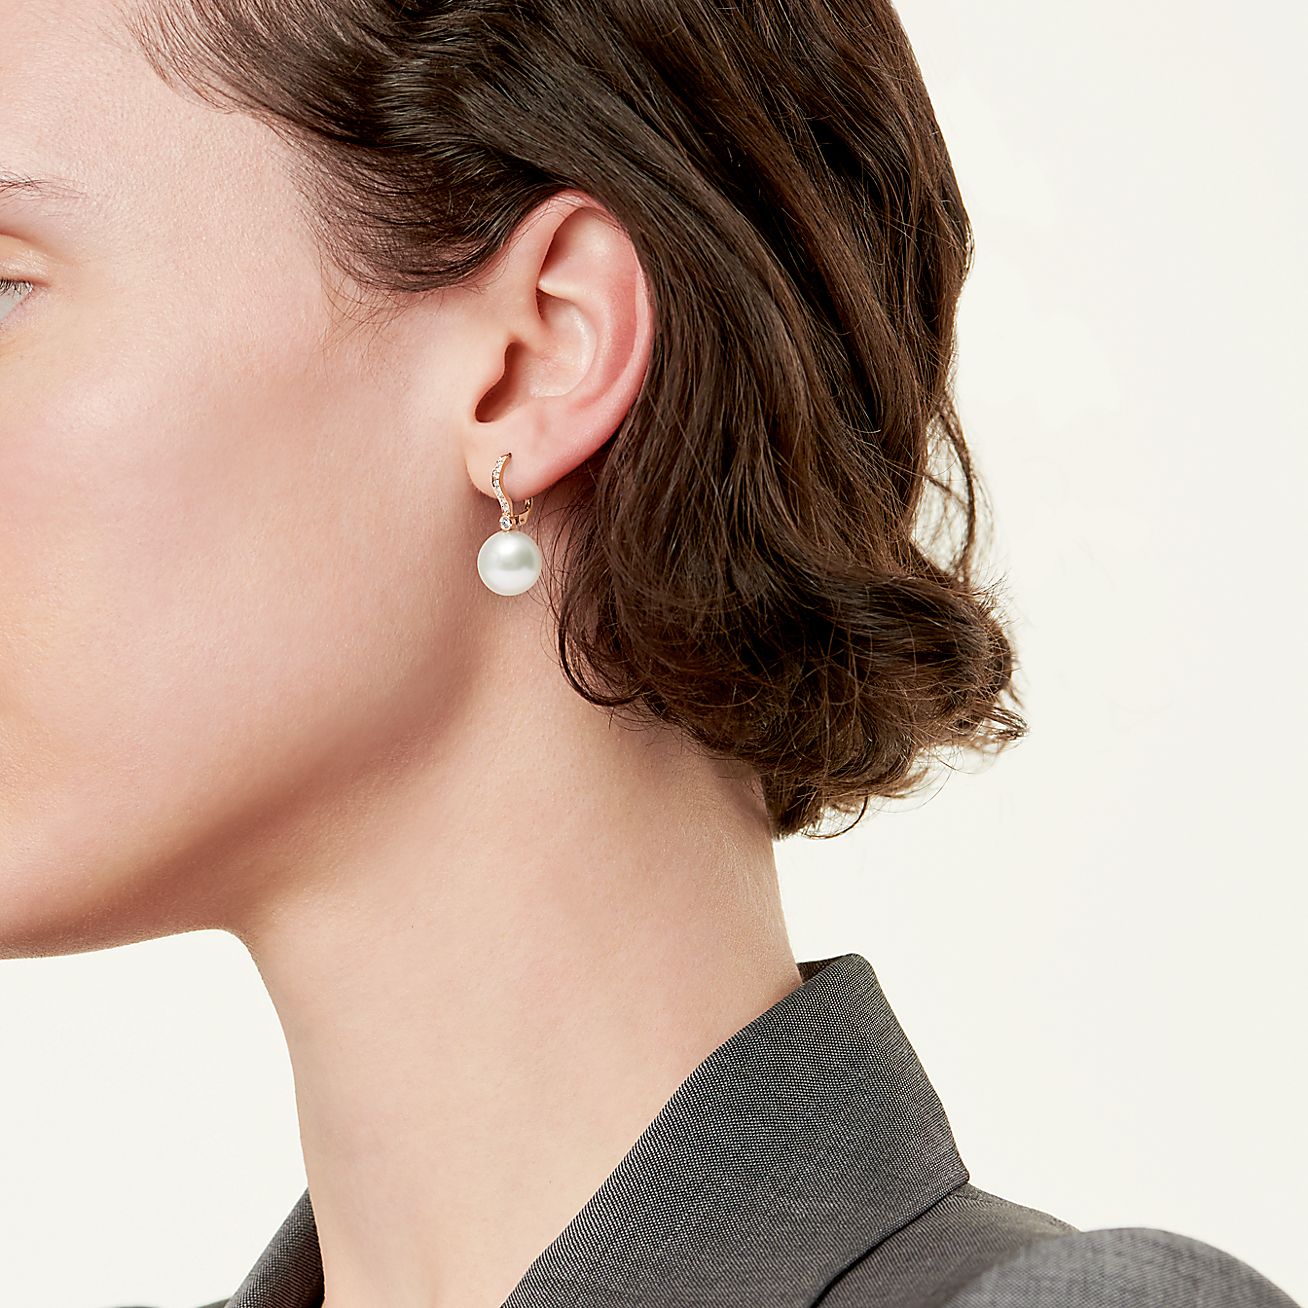 Earrings in 18k rose gold with South Sea cultured pearls and diamonds. |  Tiffany & Co.